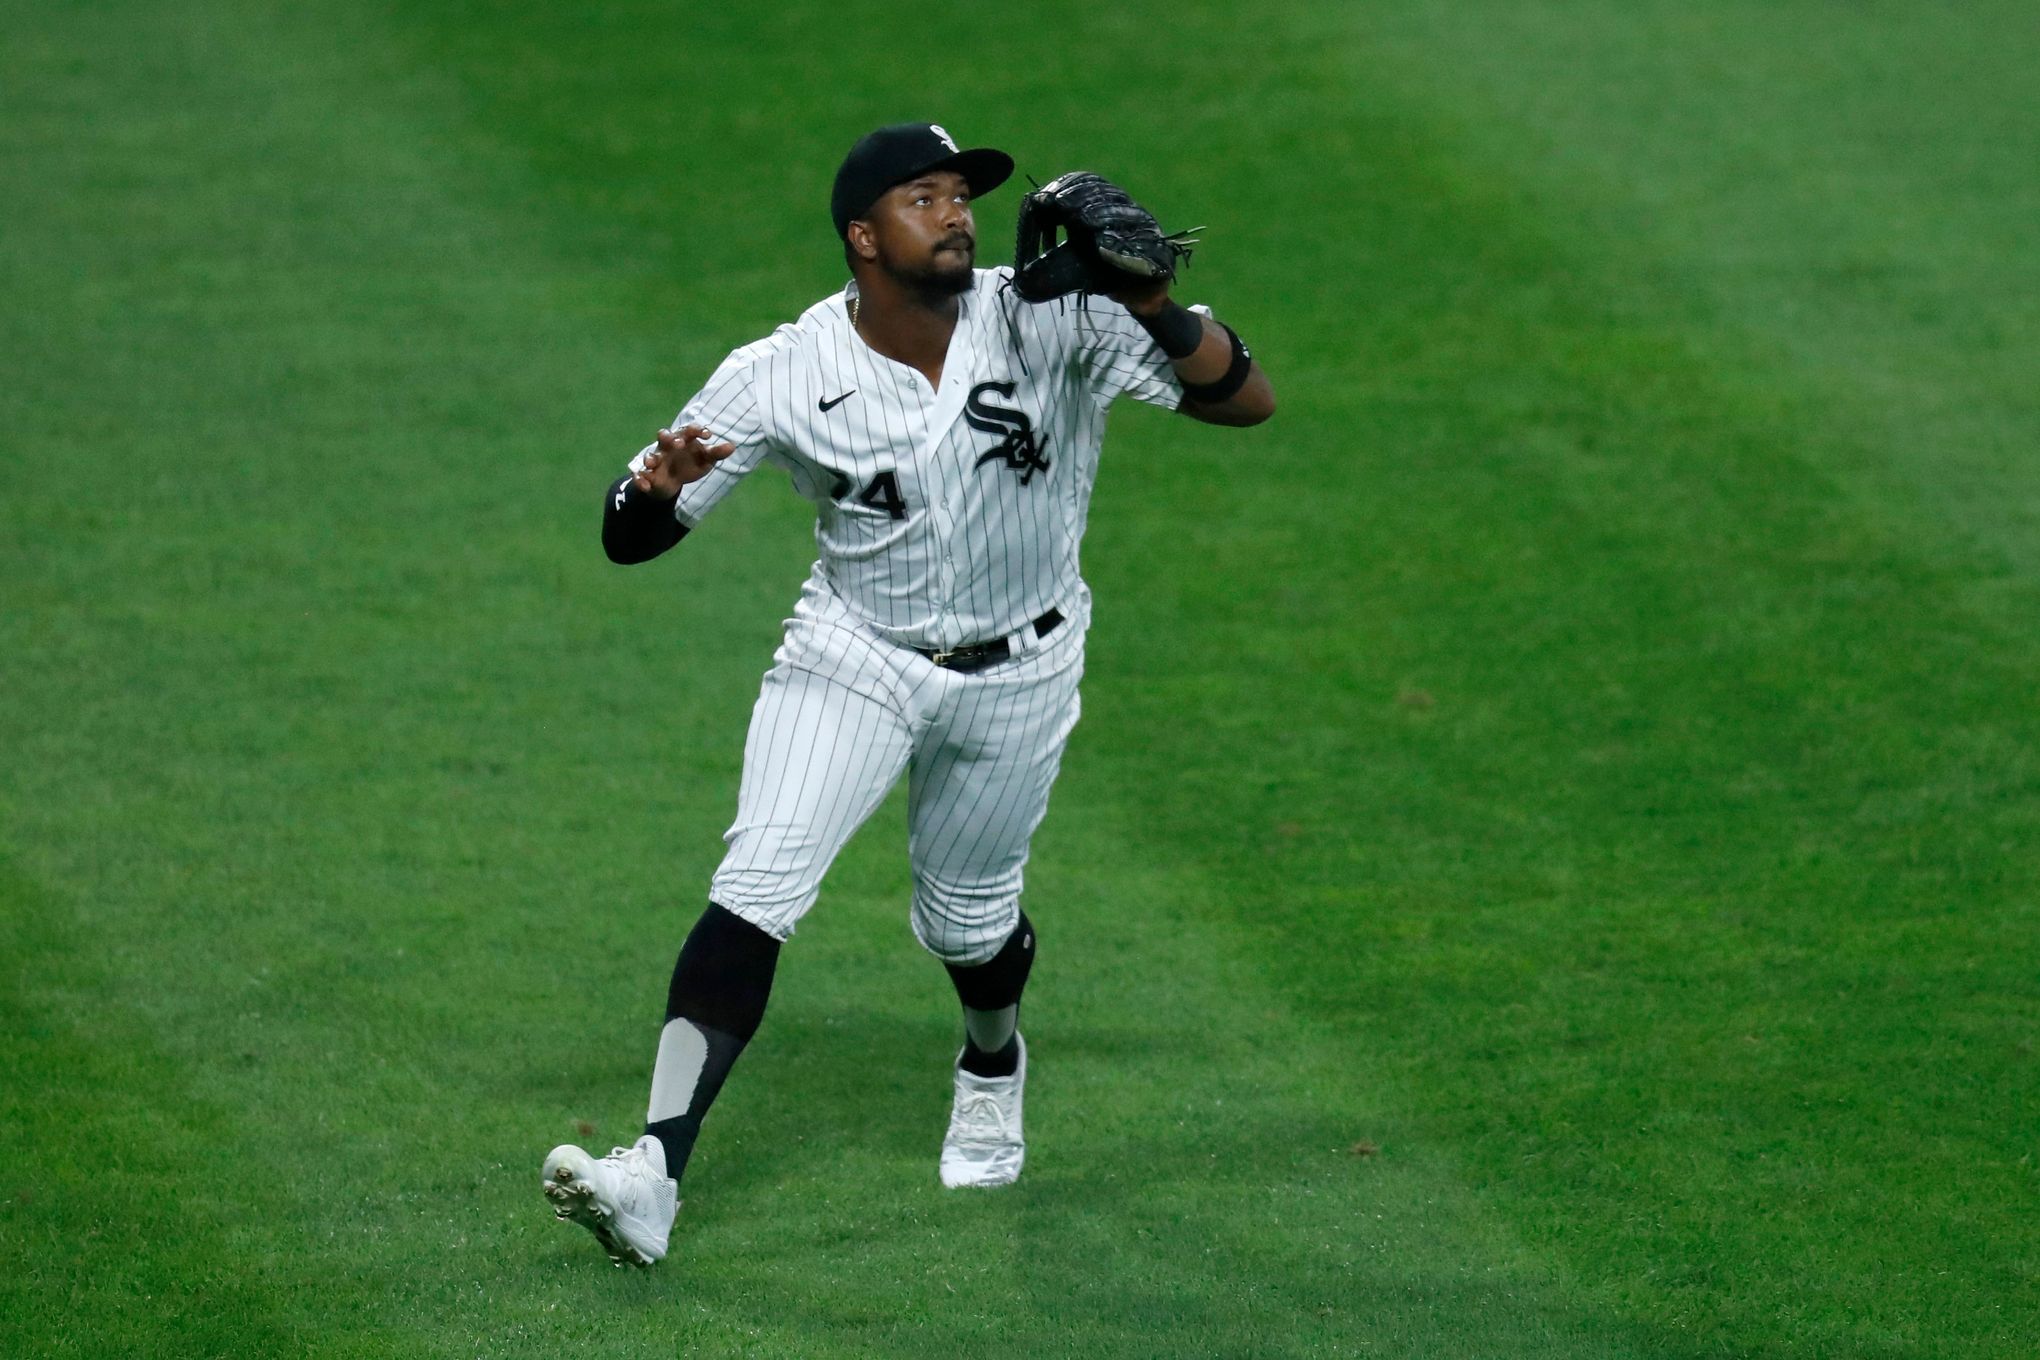 Eloy Jimenez makes one of the catches of the year for the White Sox Tuesday